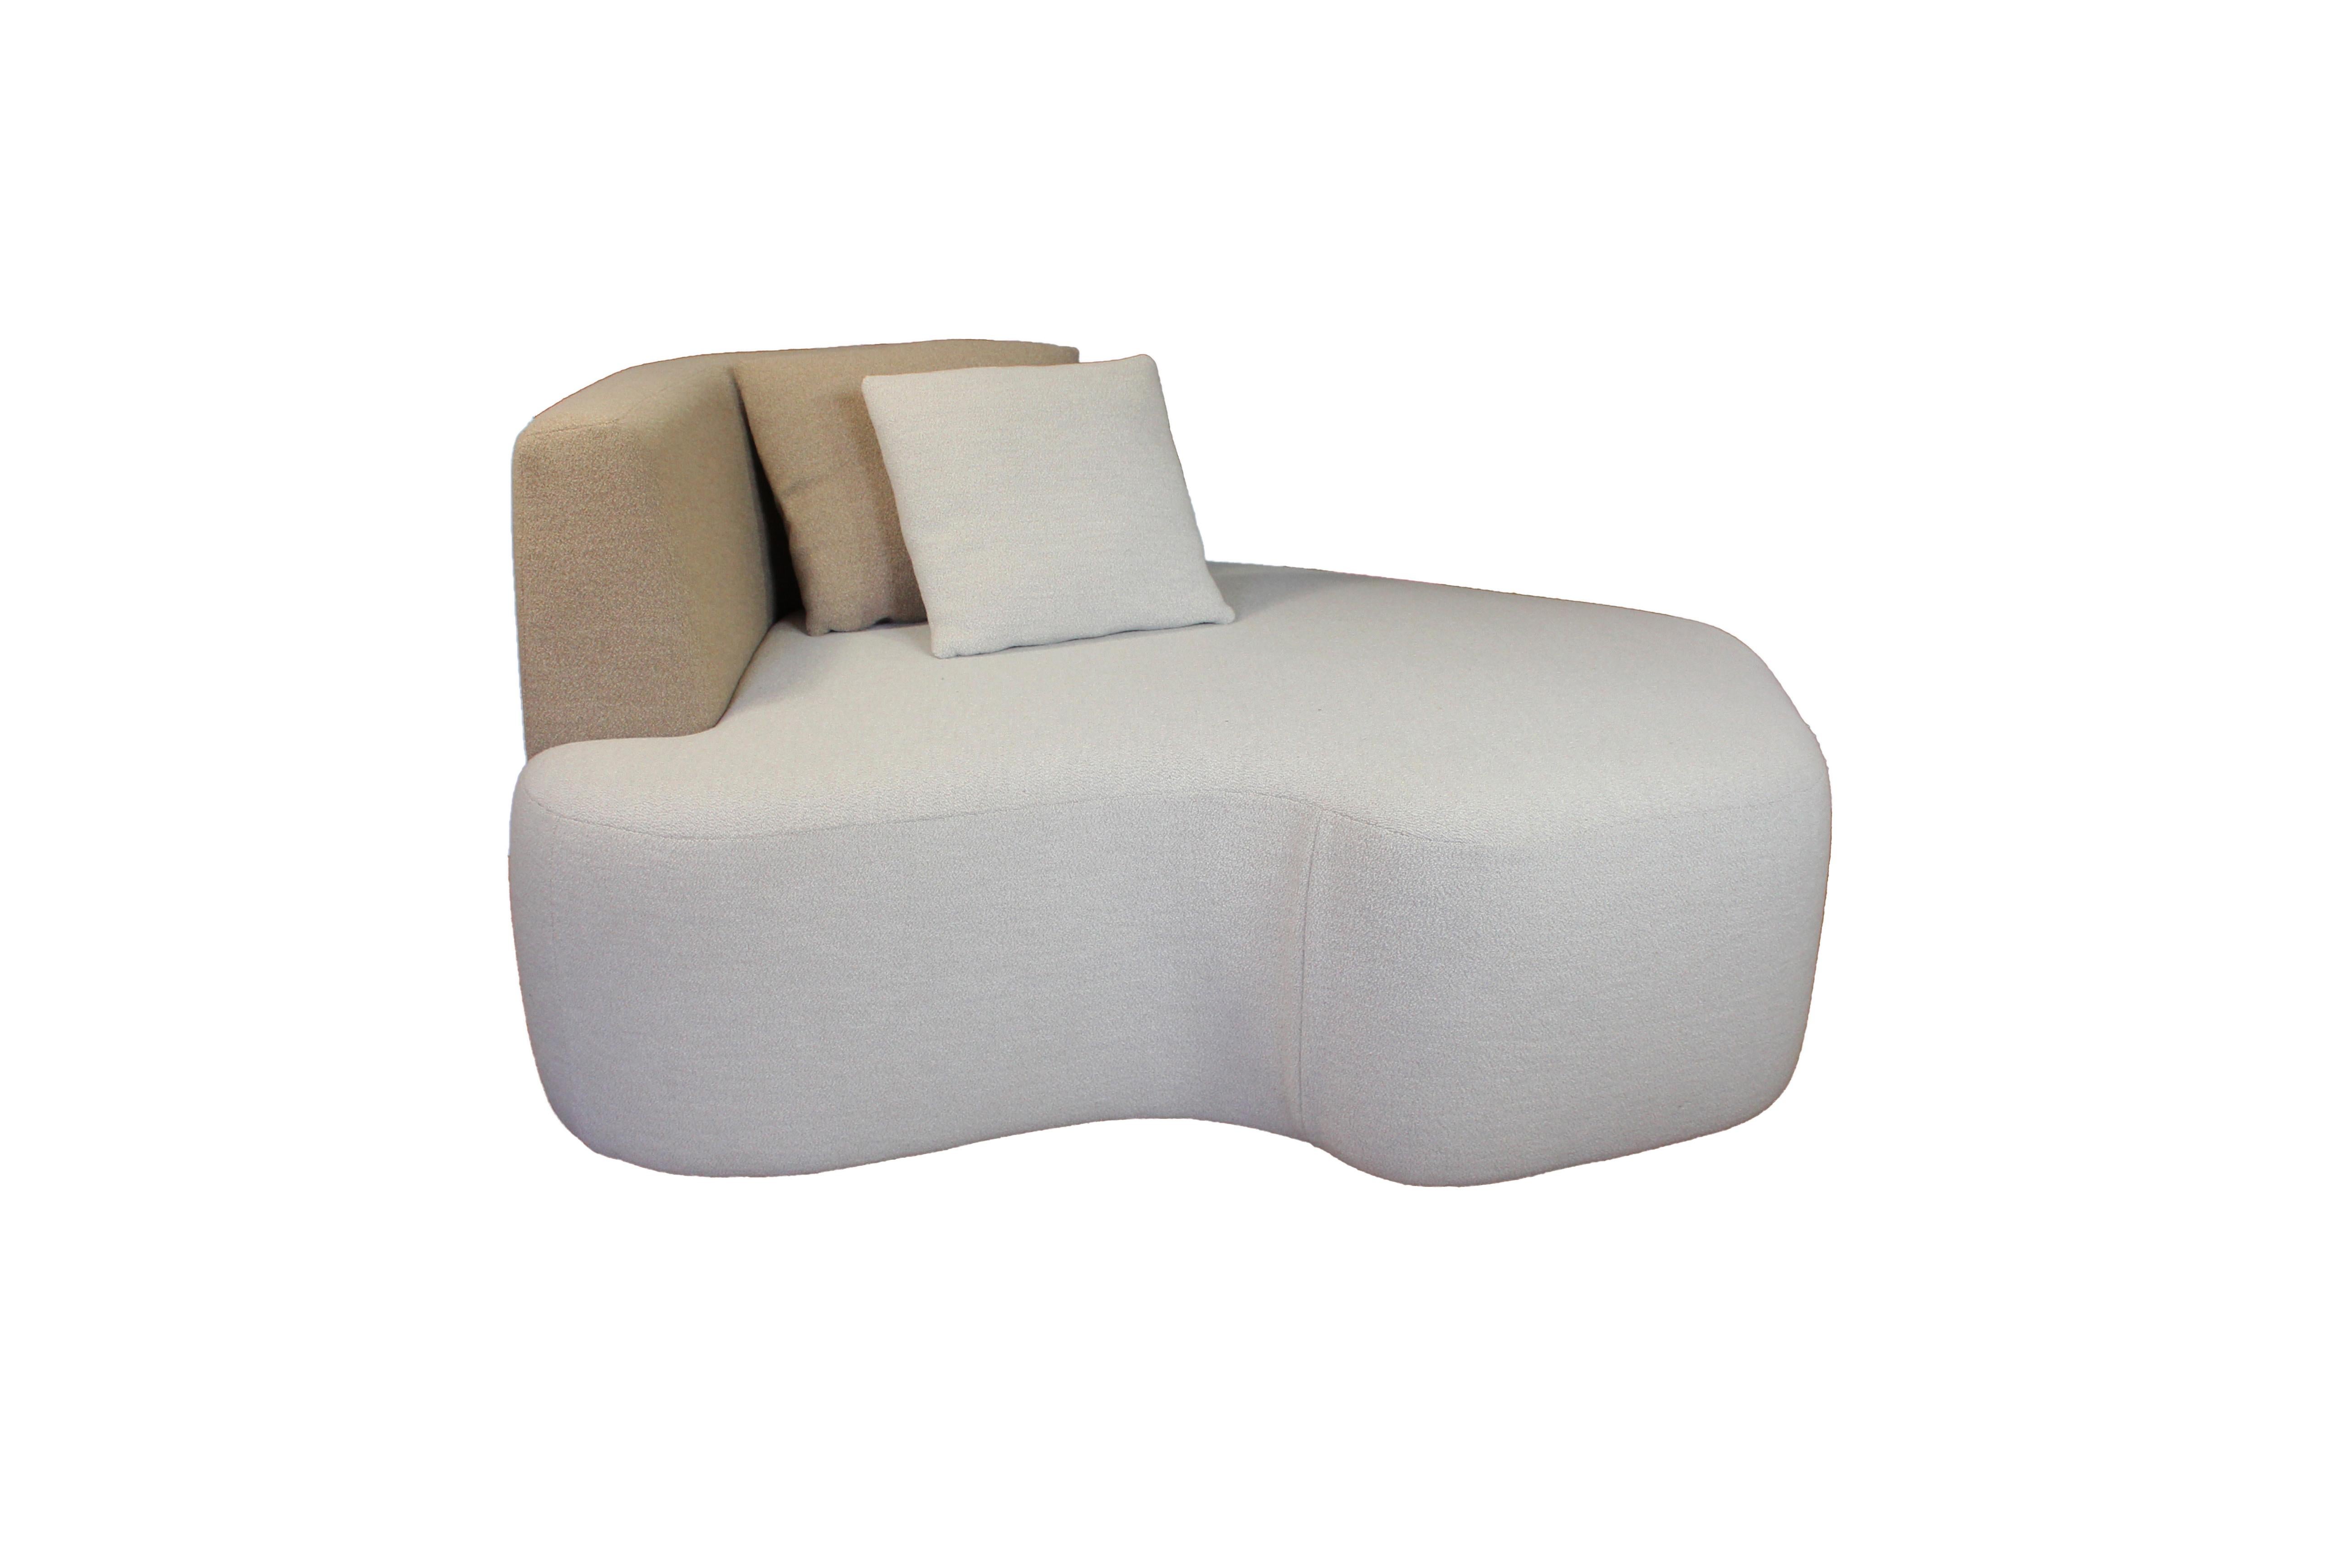 Hand-Crafted Sofa Pierre in Cream and Brown Wool For Sale